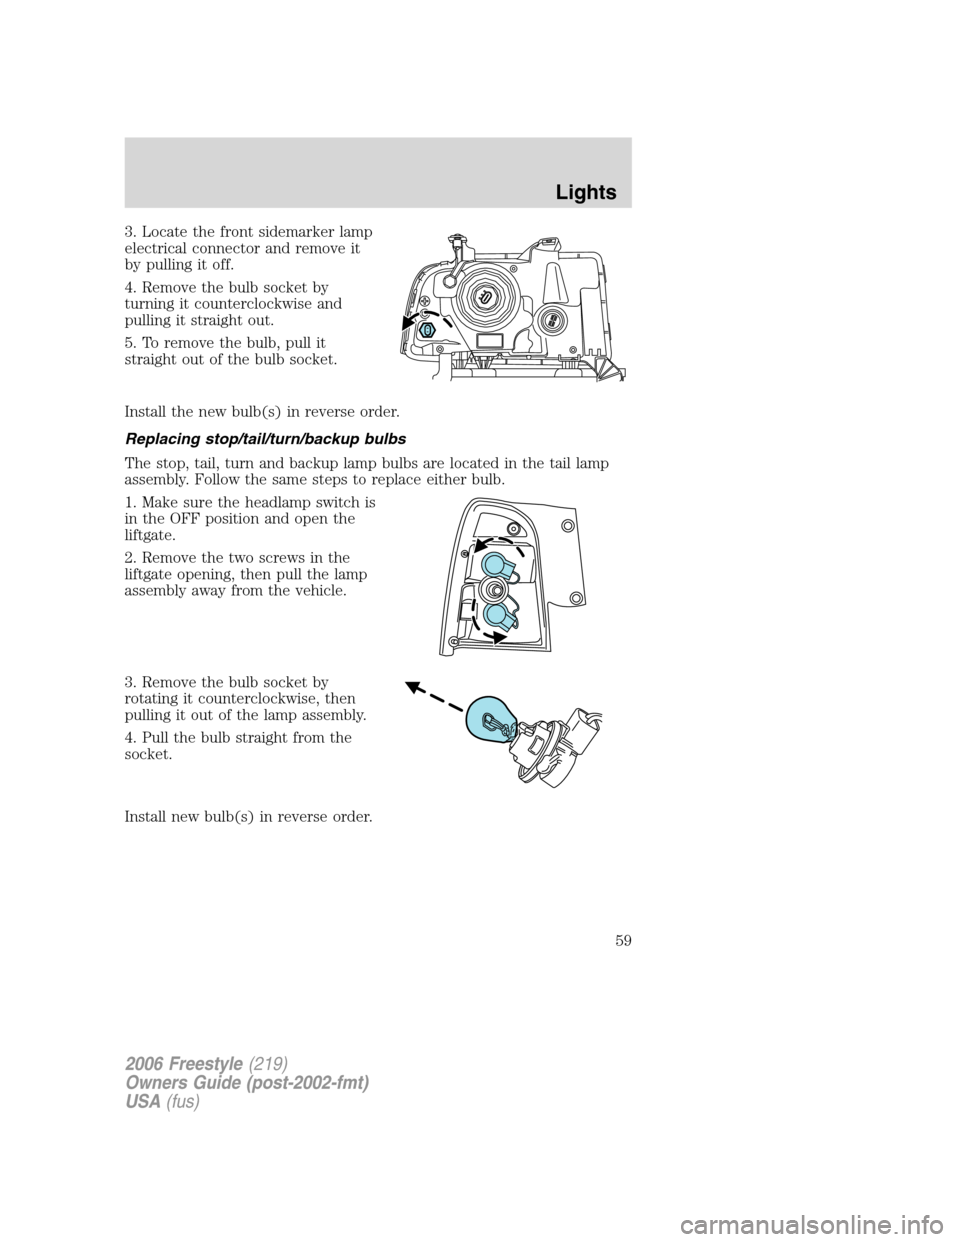 FORD FREESTYLE 2006 1.G Owners Manual 3. Locate the front sidemarker lamp
electrical connector and remove it
by pulling it off.
4. Remove the bulb socket by
turning it counterclockwise and
pulling it straight out.
5. To remove the bulb, p